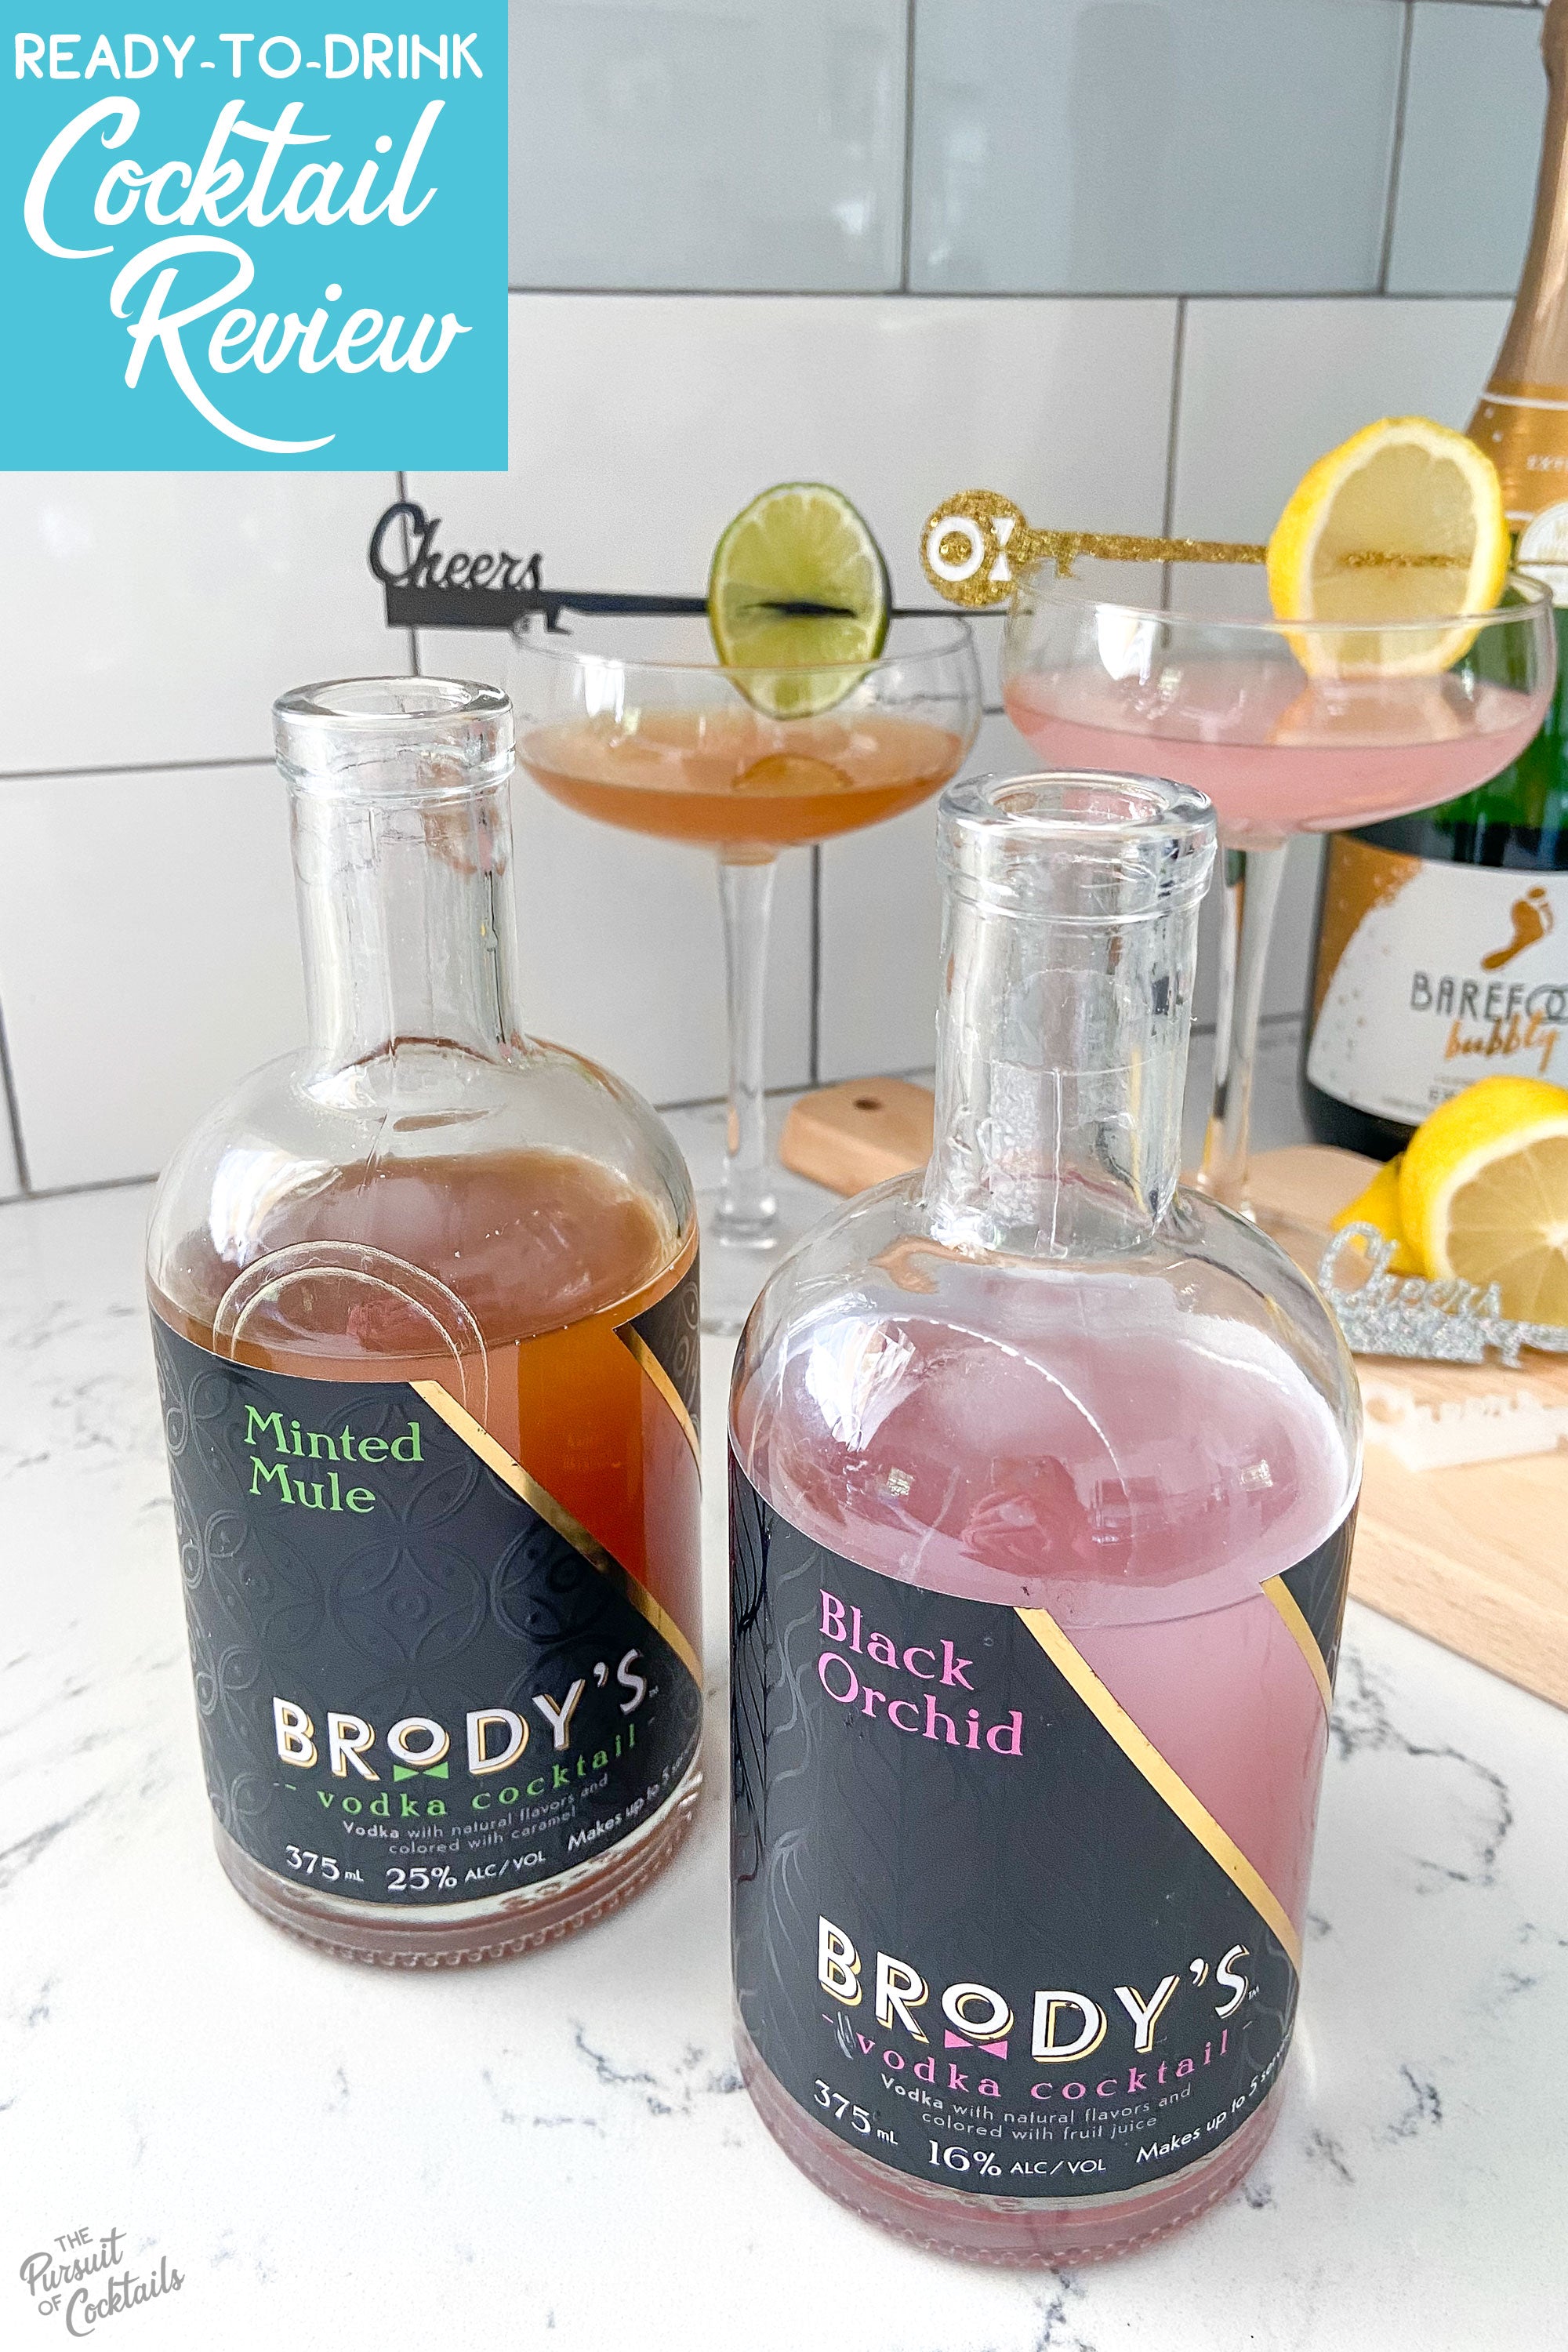 Review of Brody's Crafted Cocktails ready-to-drink vodka cocktails